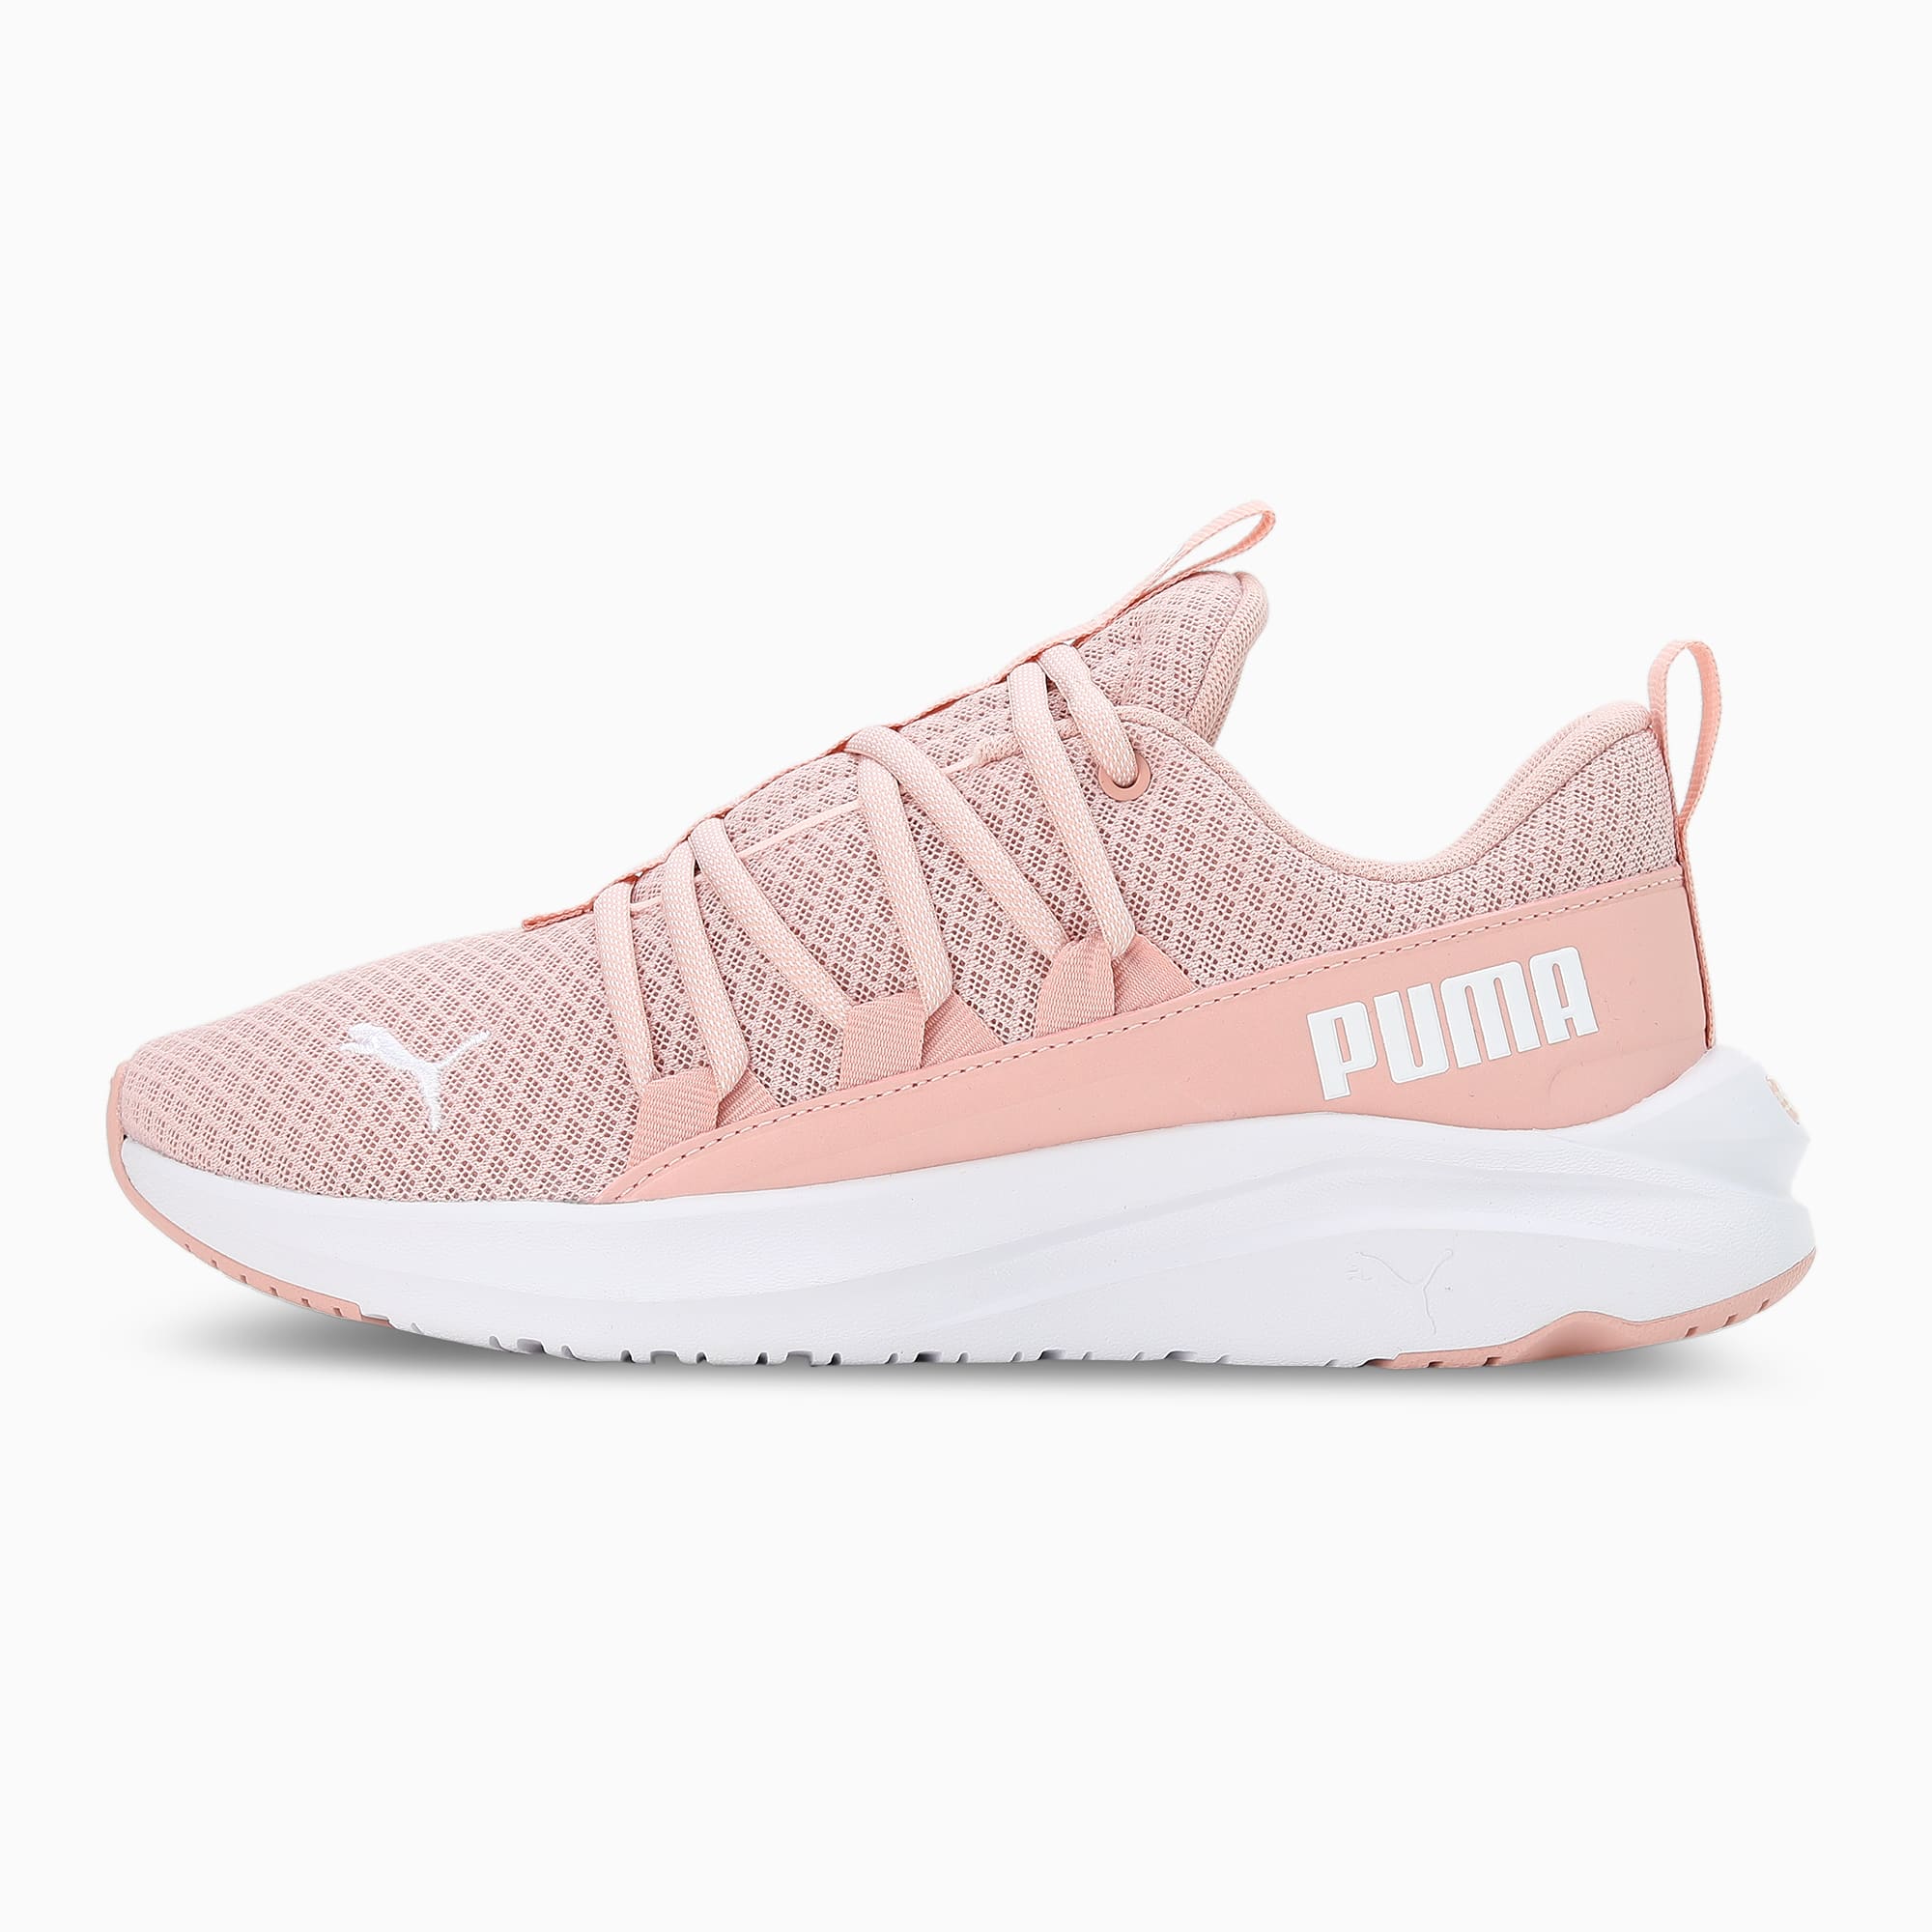 SOFTRIDE One4all Women's Walking Shoes | PUMA